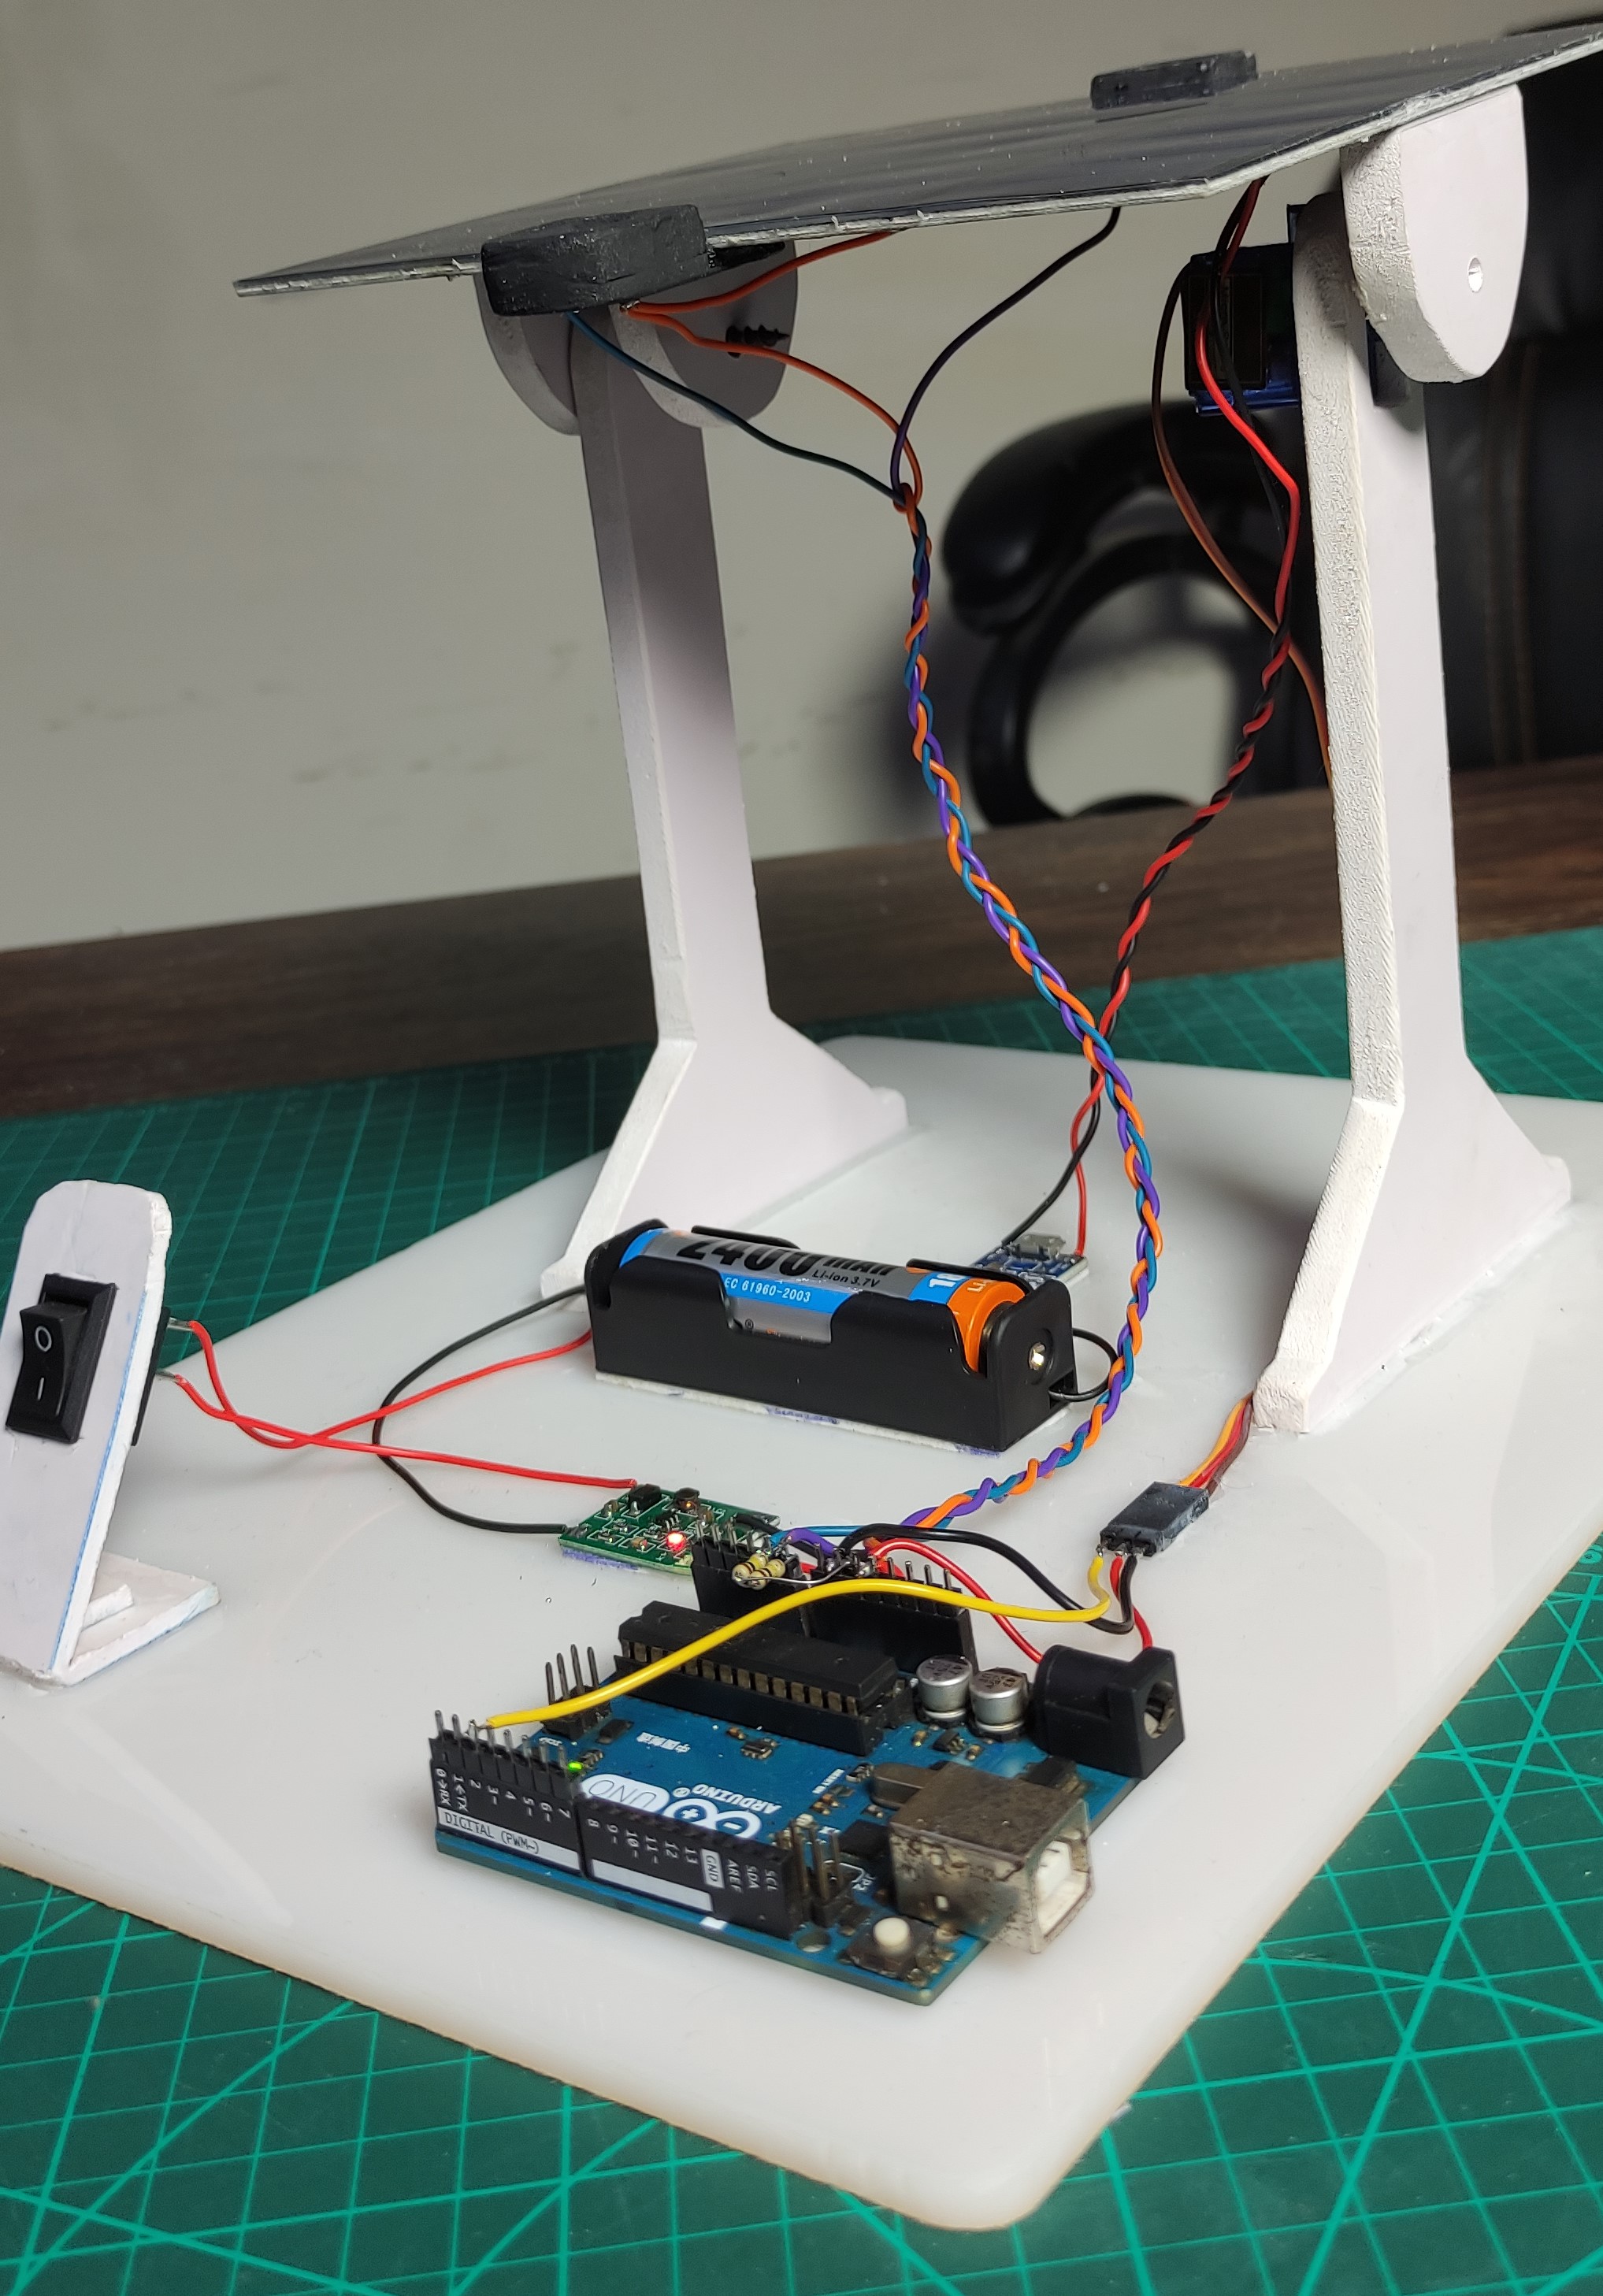 Building your own Sun Tracking Solar Panel using an Arduino